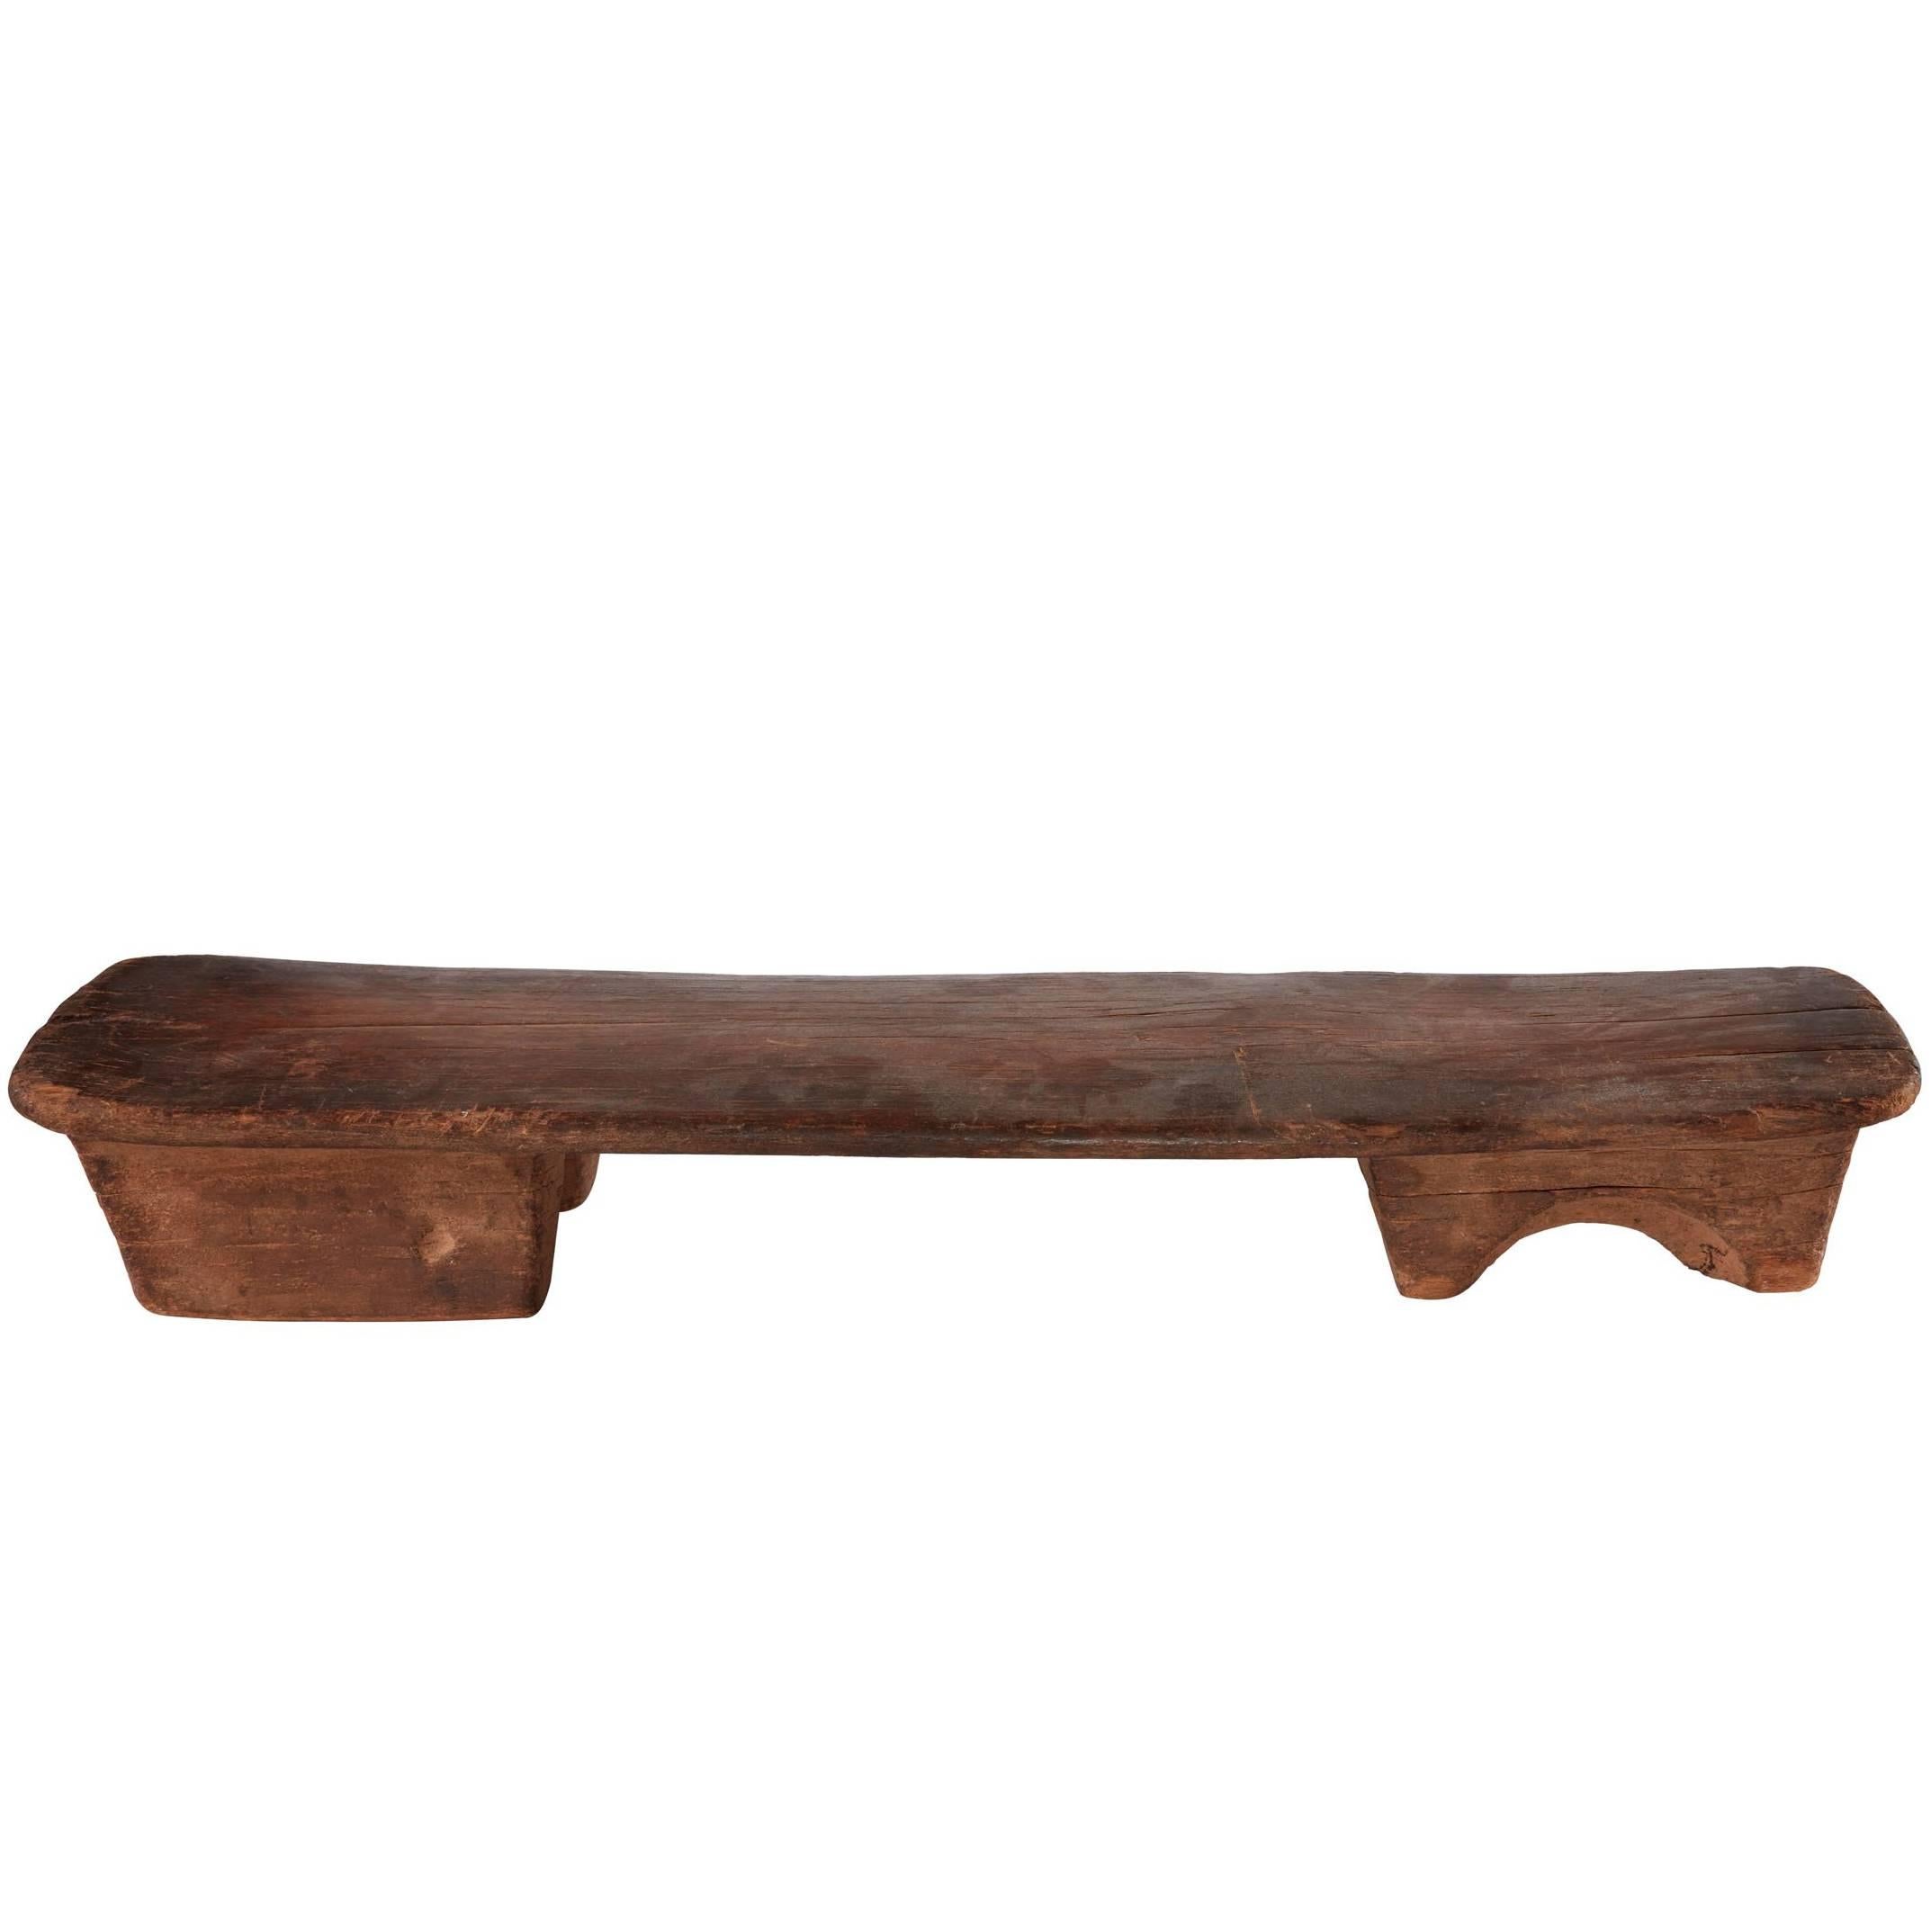 Early 20th Century Narrow Wooden African Bench/Stool from Cameroon